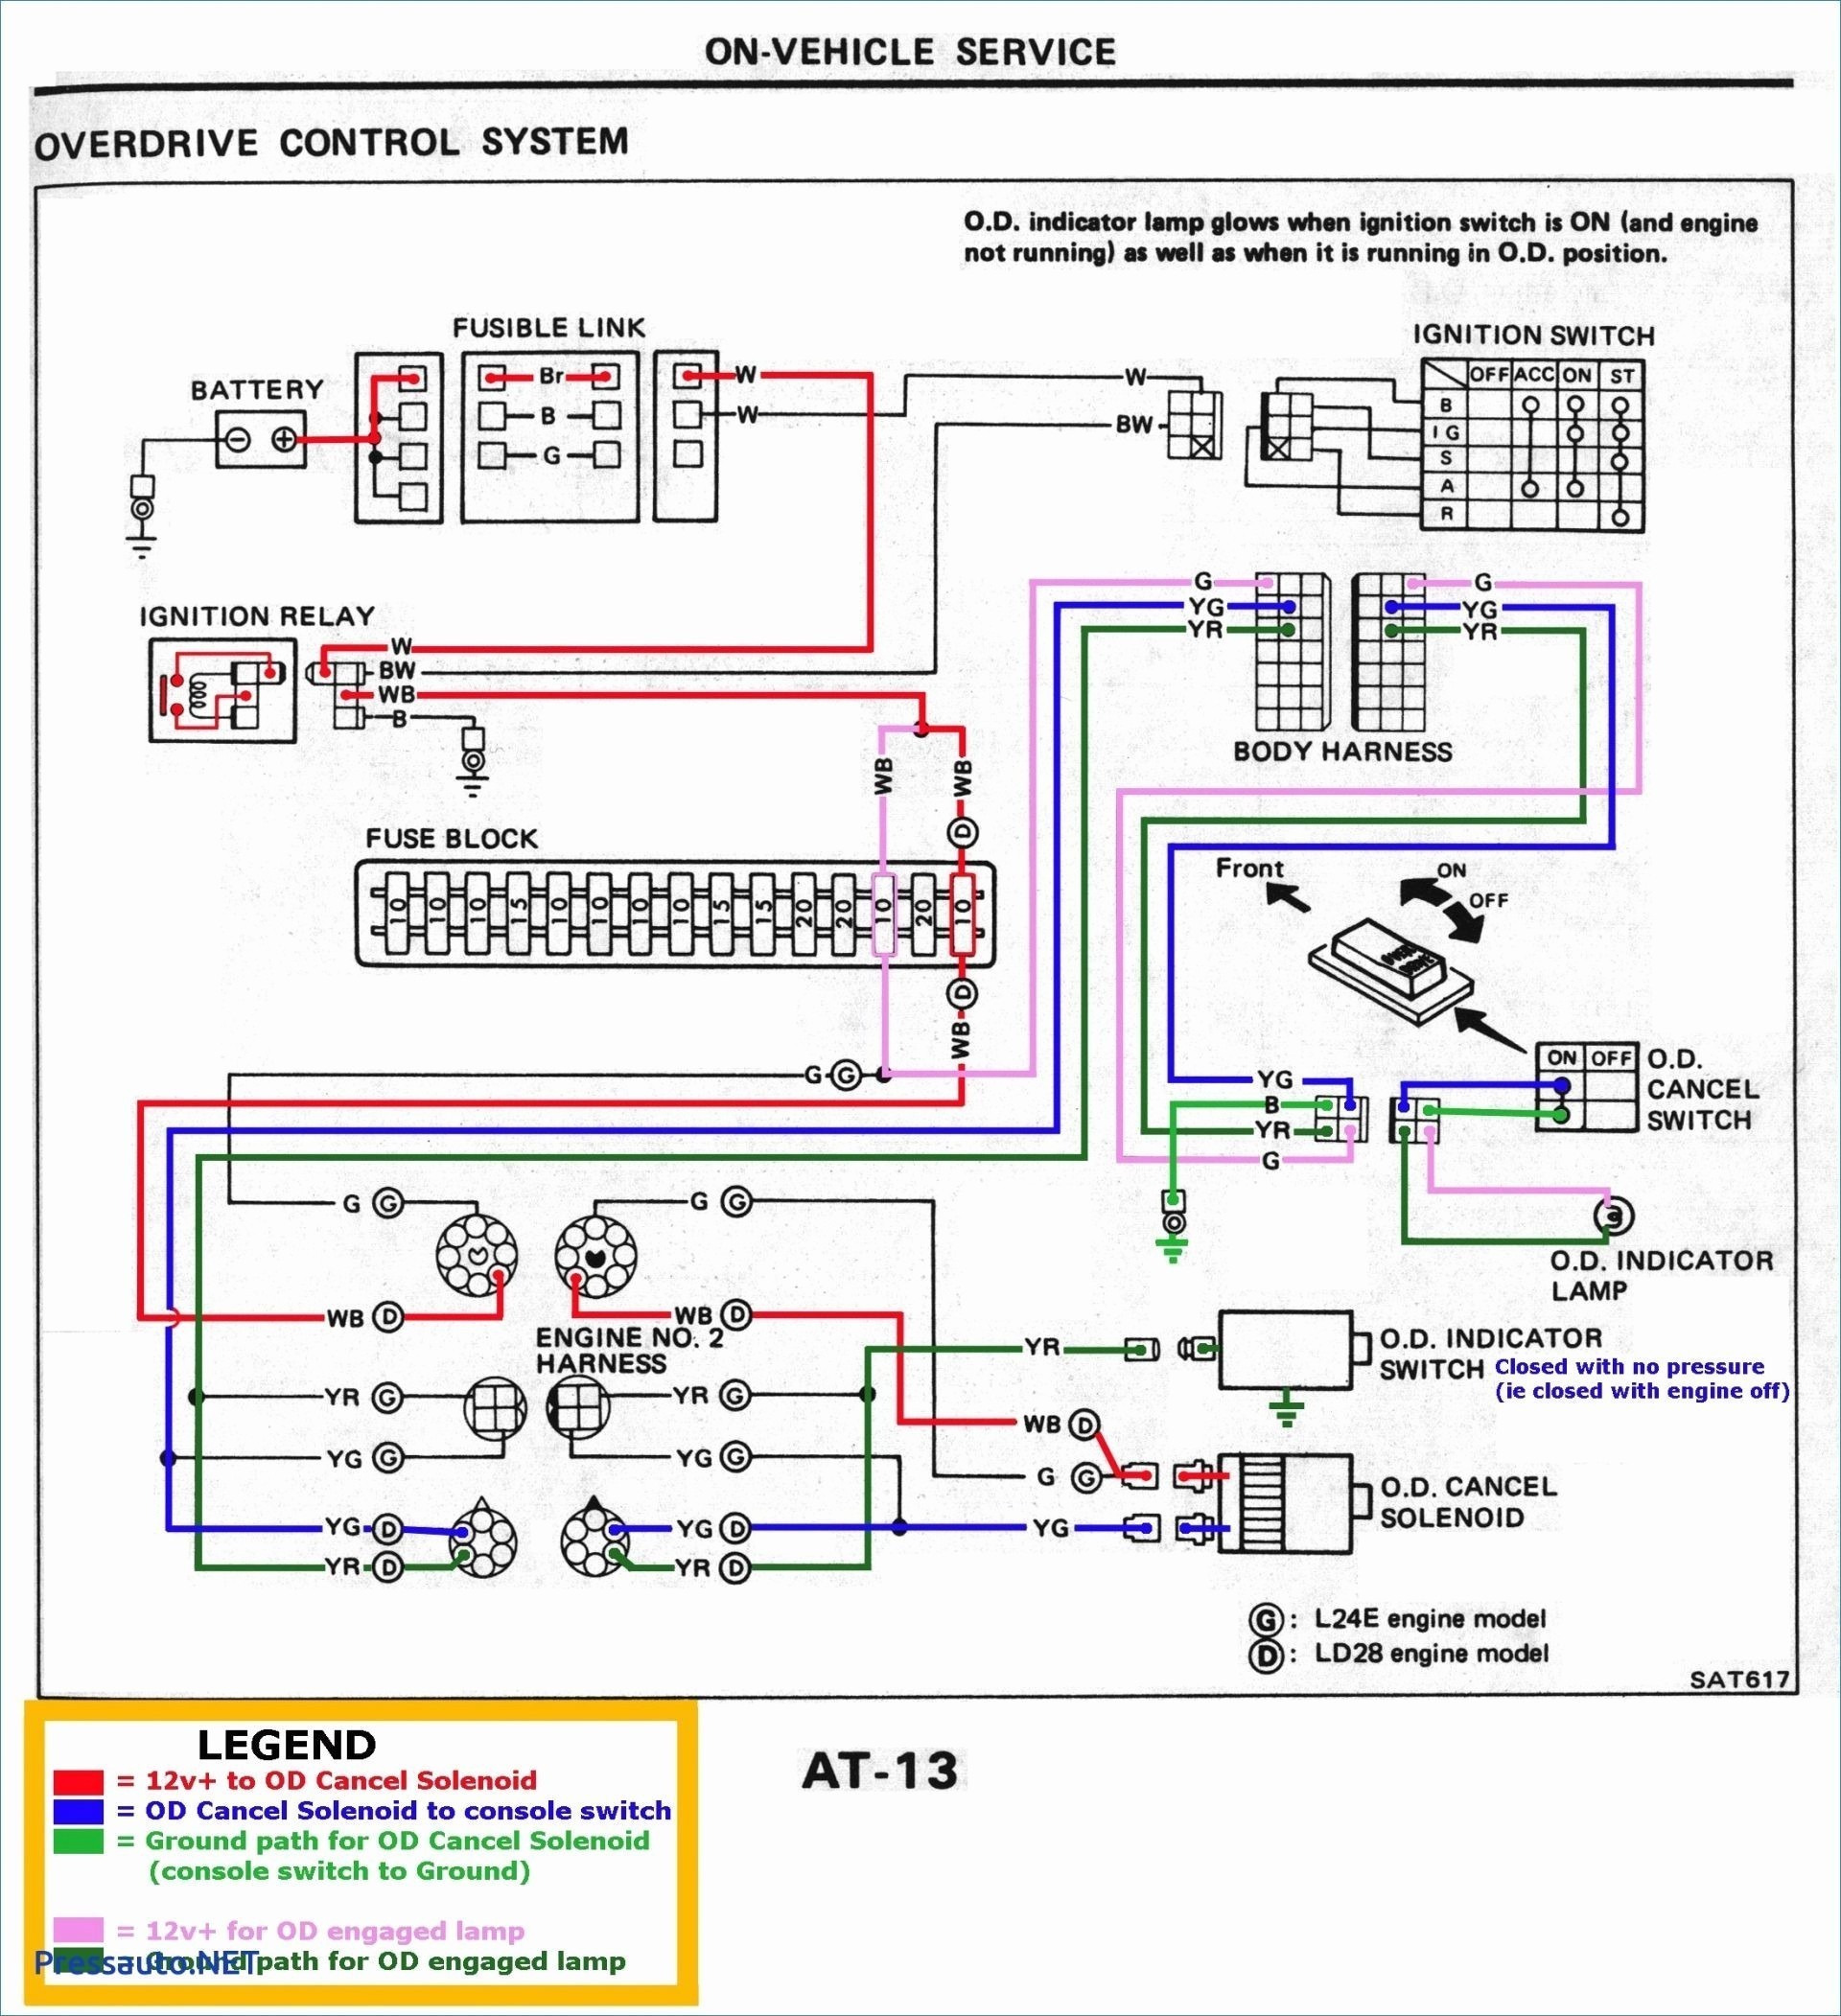 Chevy Master Cylinder Diagram Wiring Diagram for Ignition System Inspirationa Chevy Ignition Of Chevy Master Cylinder Diagram